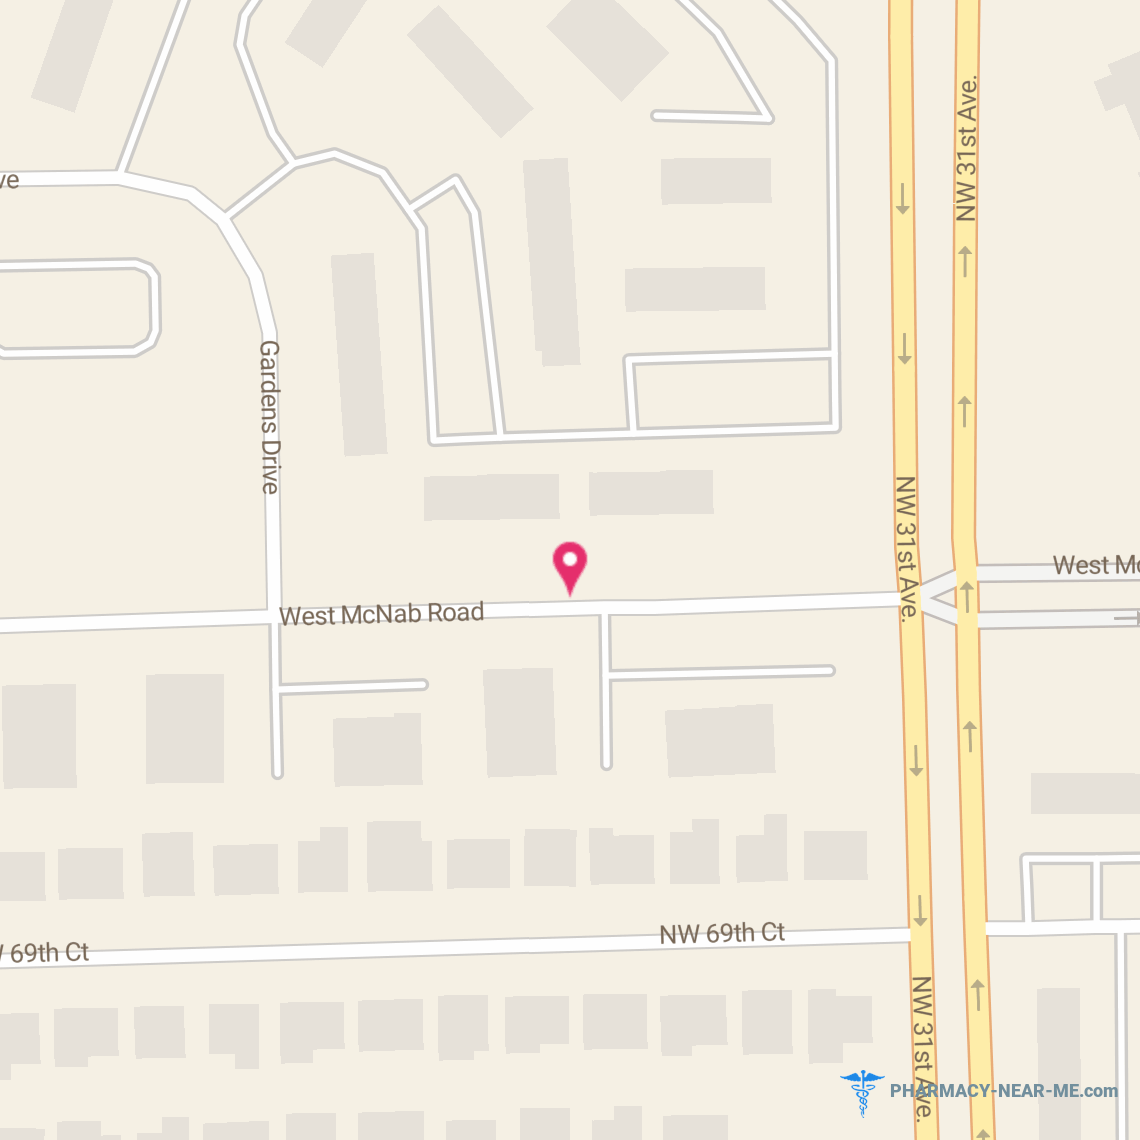 SKNV - Pharmacy Hours, Phone, Reviews & Information: 3265 West Mcnab Road, Pompano Beach, Florida 33069, United States